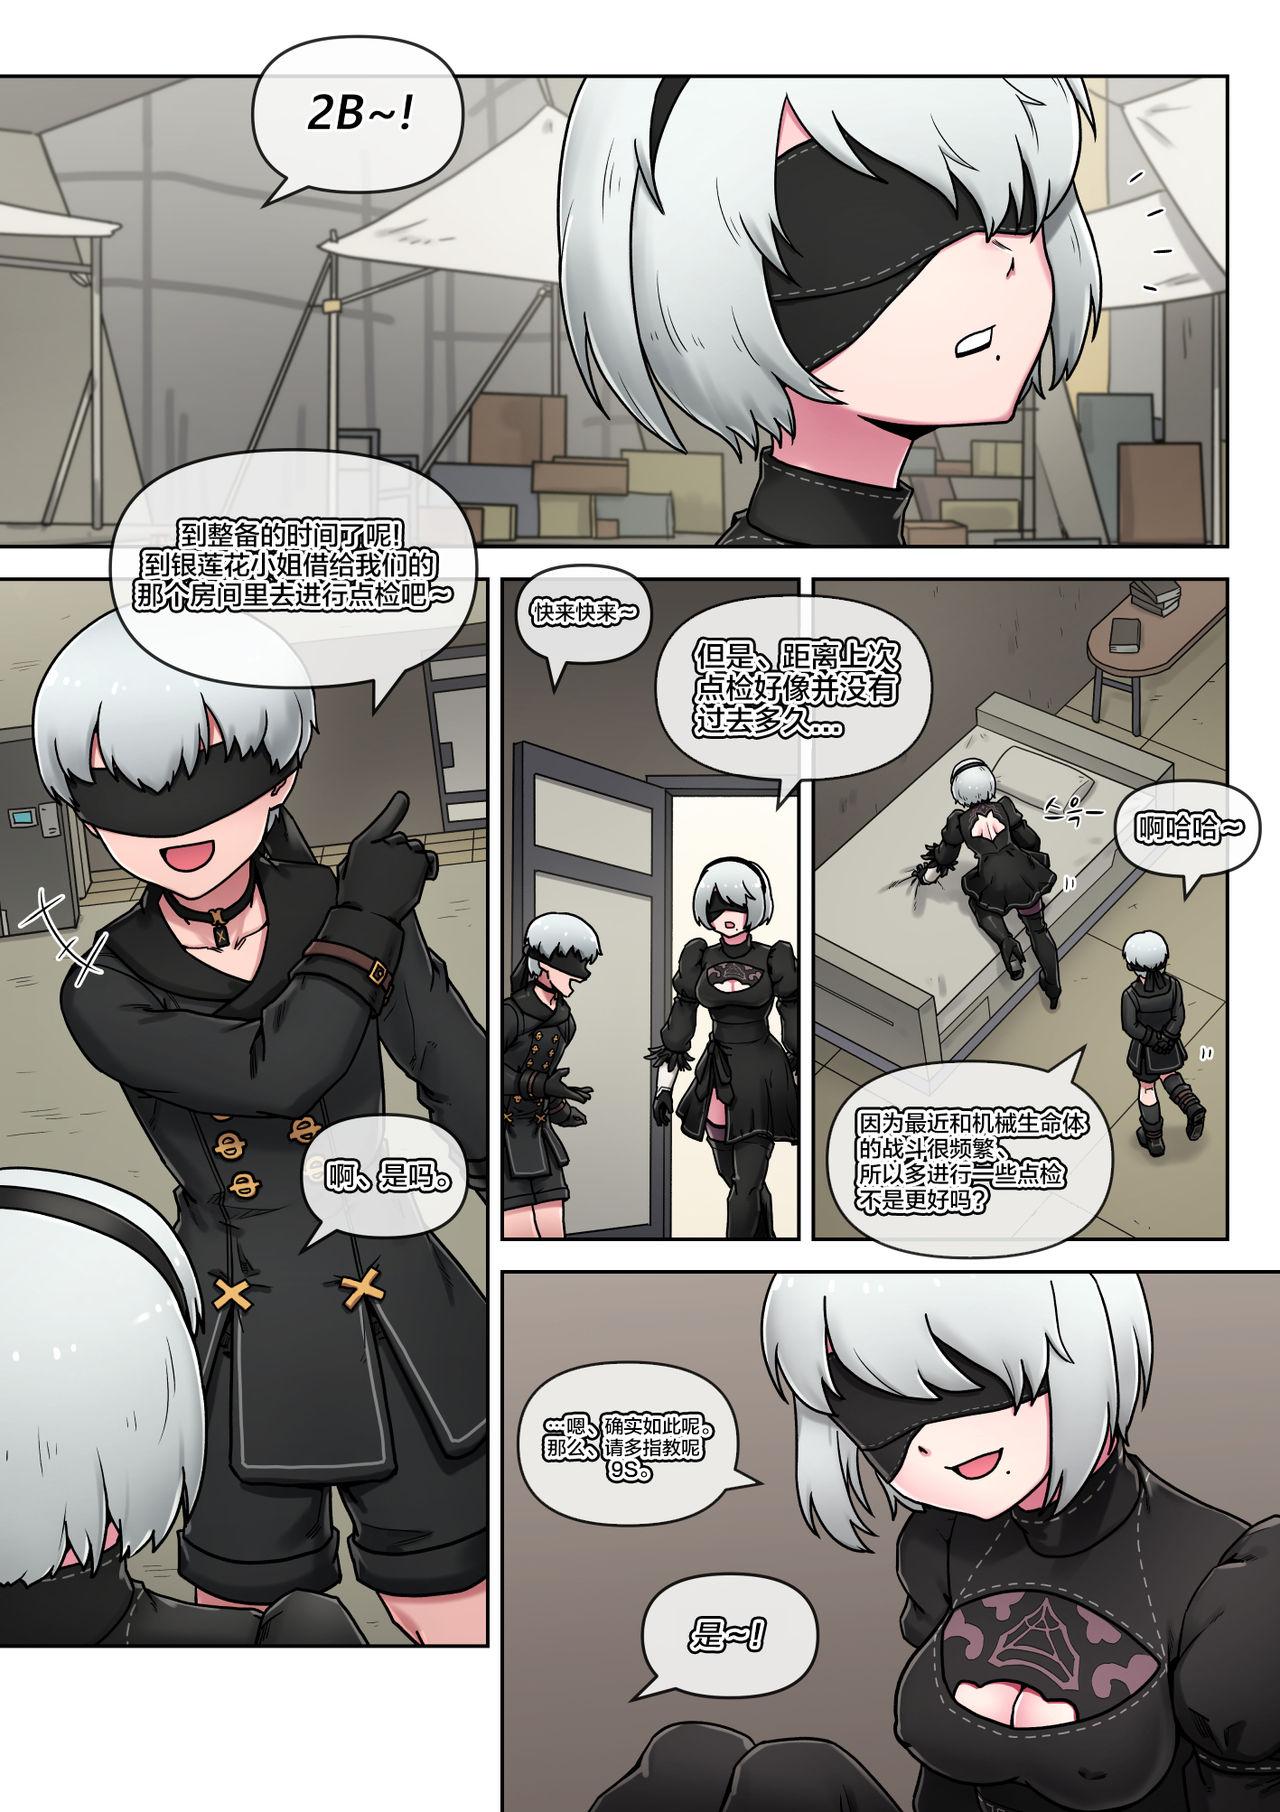 Time for maintenance, 2B 3